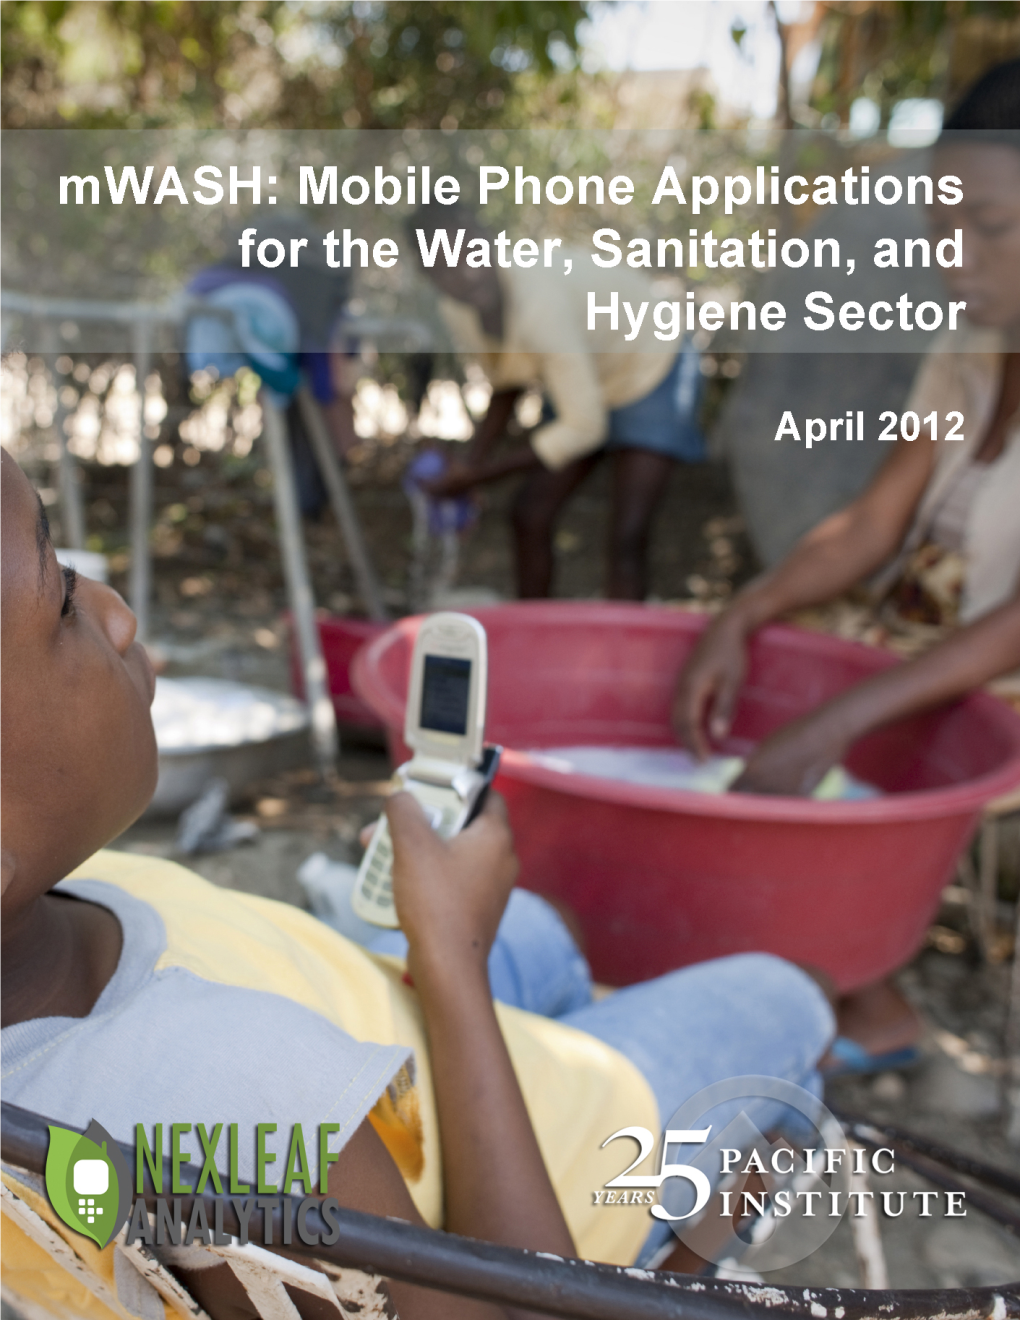 Mwash: Mobile Phone Applications for the Water, Sanitation, and Hygiene Sector Mwash: Mobile Phone Applications for the Water, Sanitation, and Hygiene Sector